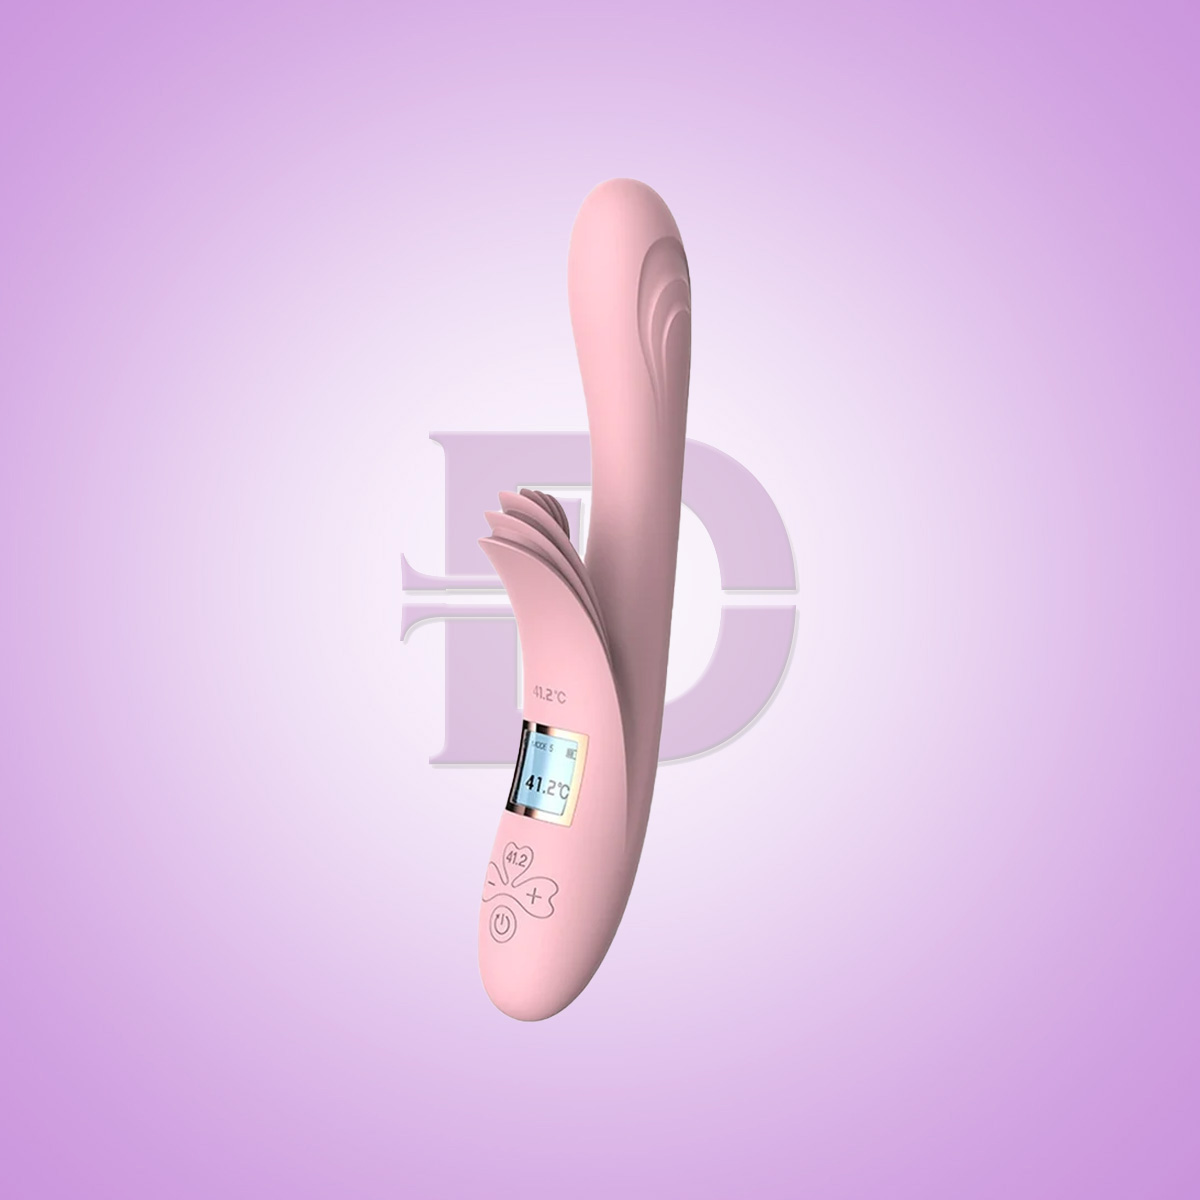 Lilo rabbit vibrator female sex toy with LCD screen at Delighttoys